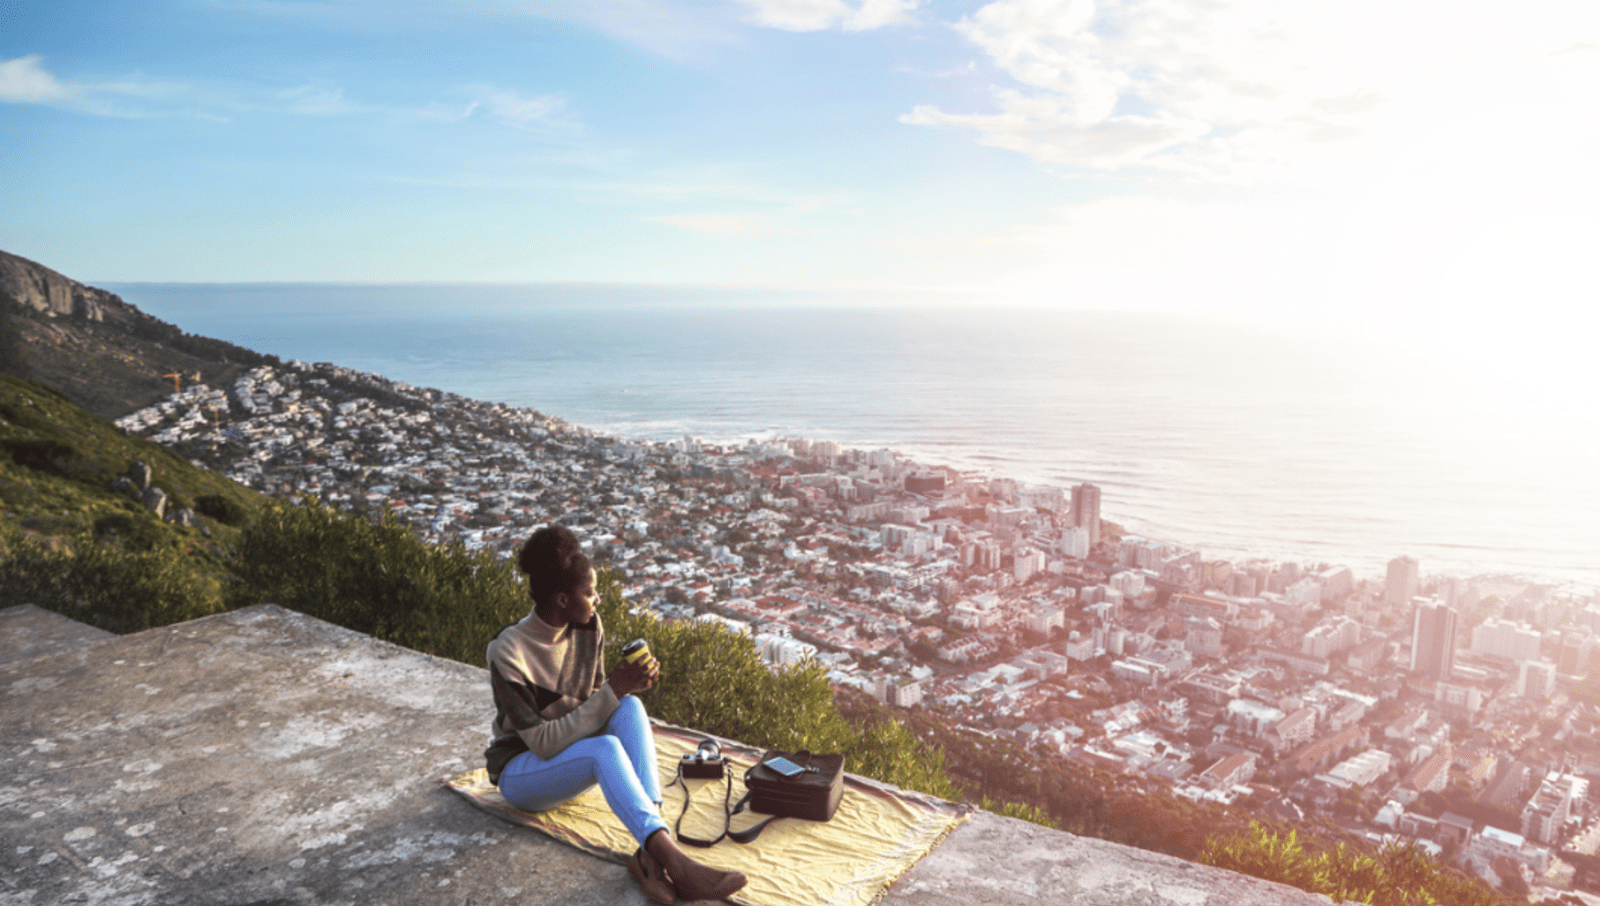 Lady sitting on yellow blanket while on top of a hill overlooking a city and the sea in capetown